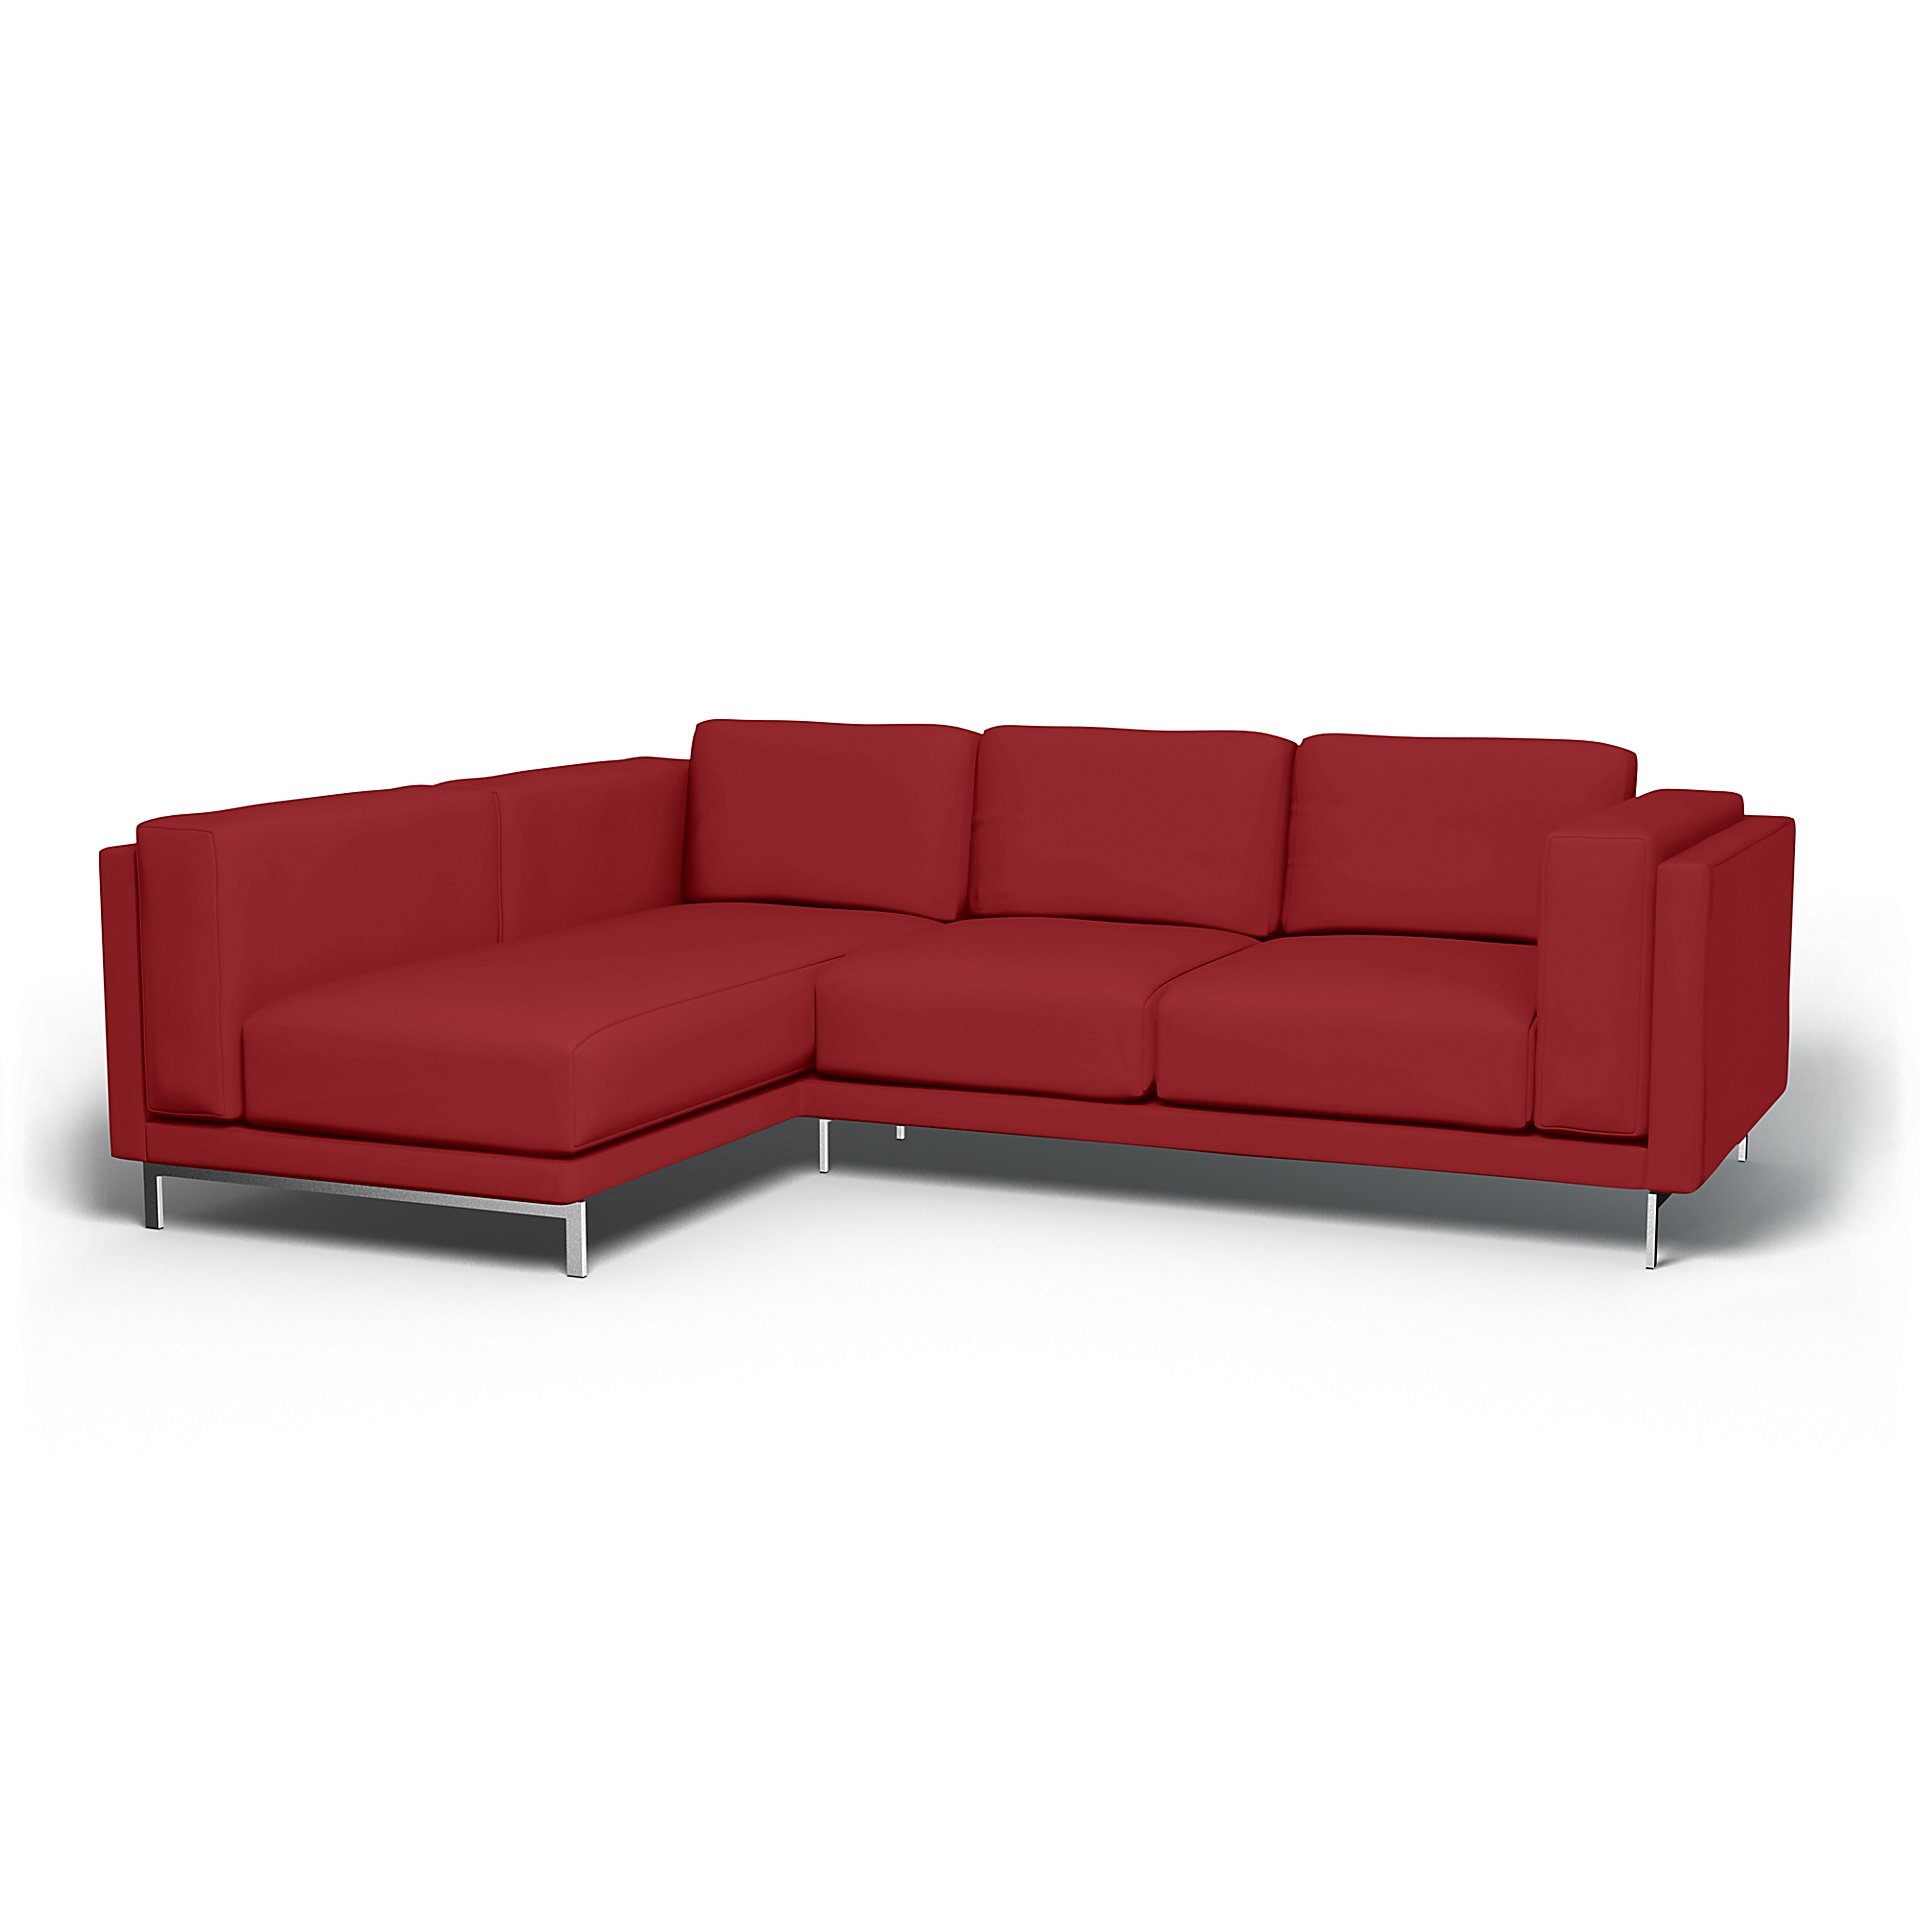 IKEA - Nockeby 3 Seater Sofa with Left Chaise Cover, Scarlet Red, Cotton - Bemz